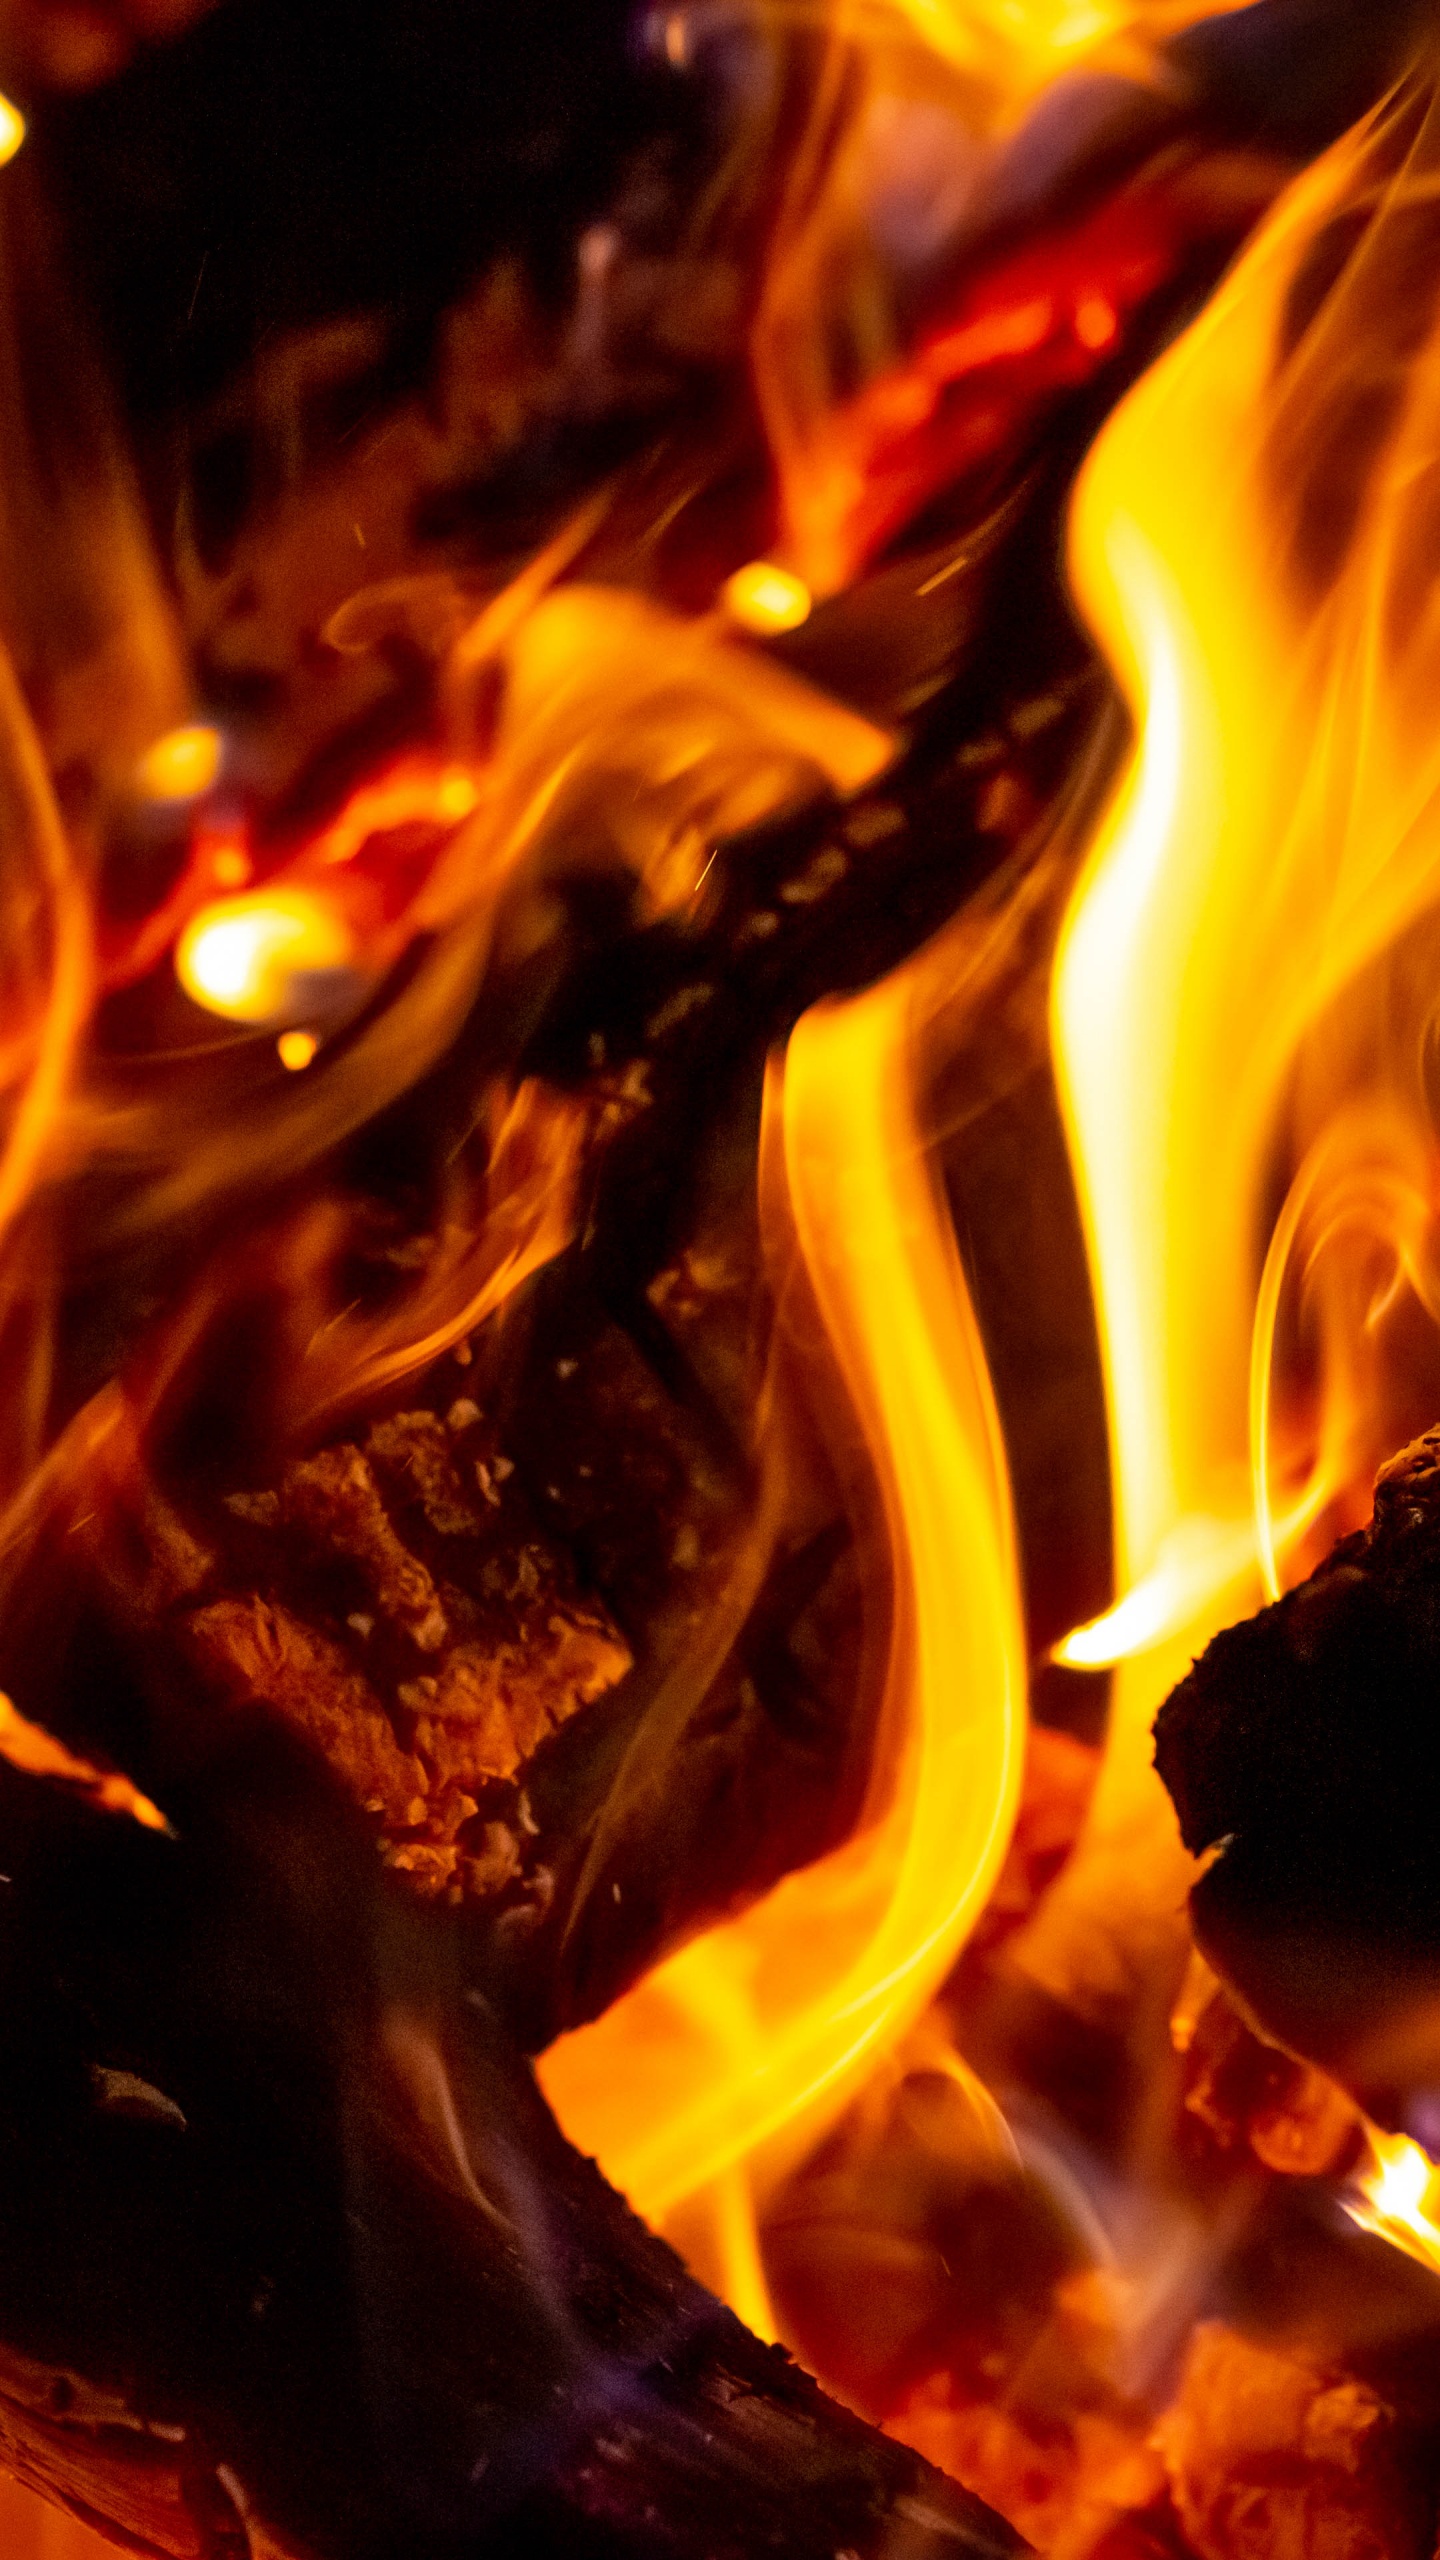 Orange and Black Fire in Close up Photography. Wallpaper in 1440x2560 Resolution